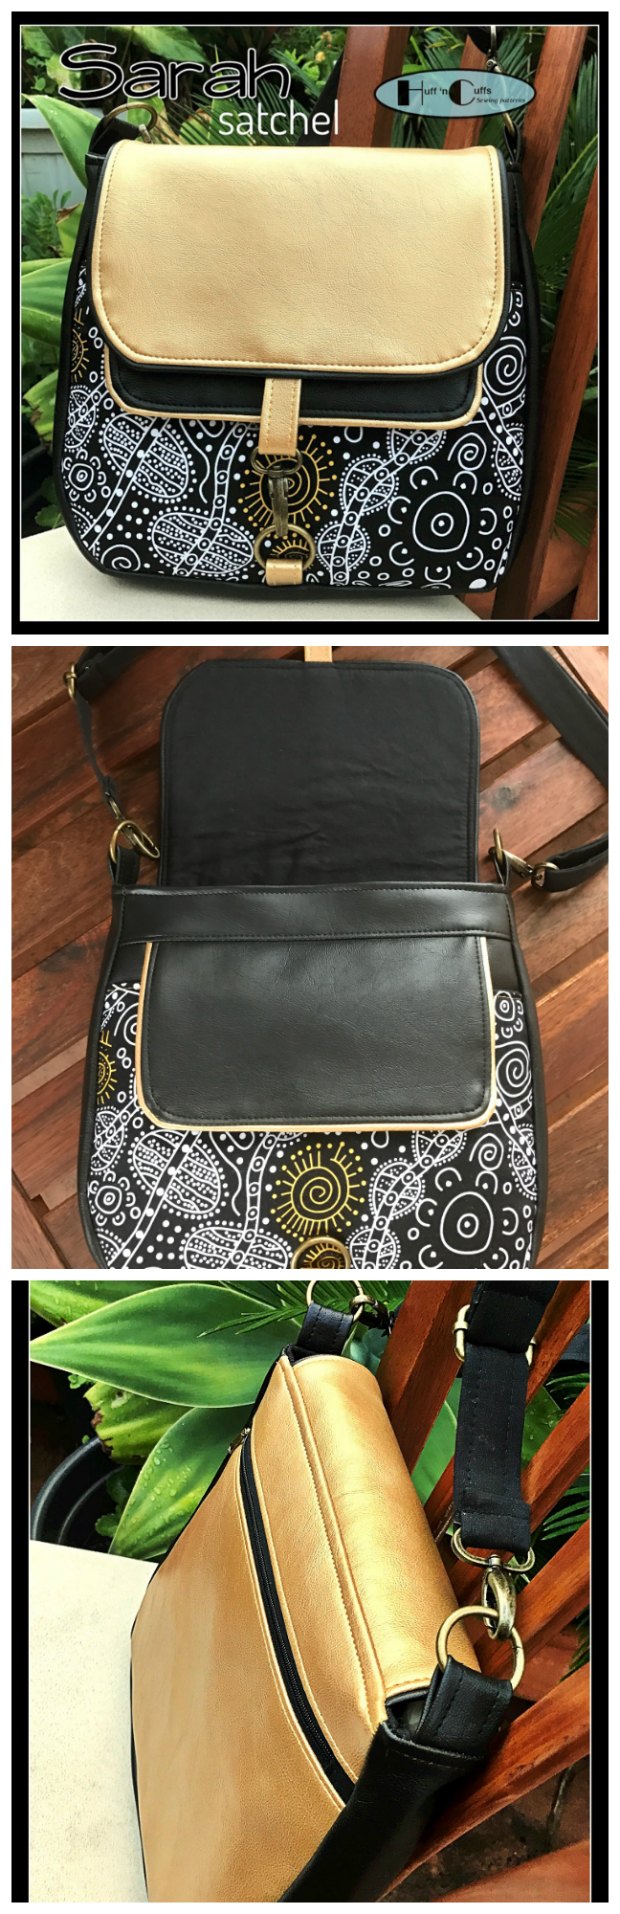 Sarah Satchel sewing pattern, works well in quilting cottons, home decor weight fabrics and vinyl or leather. A dream to sew and carry :-)